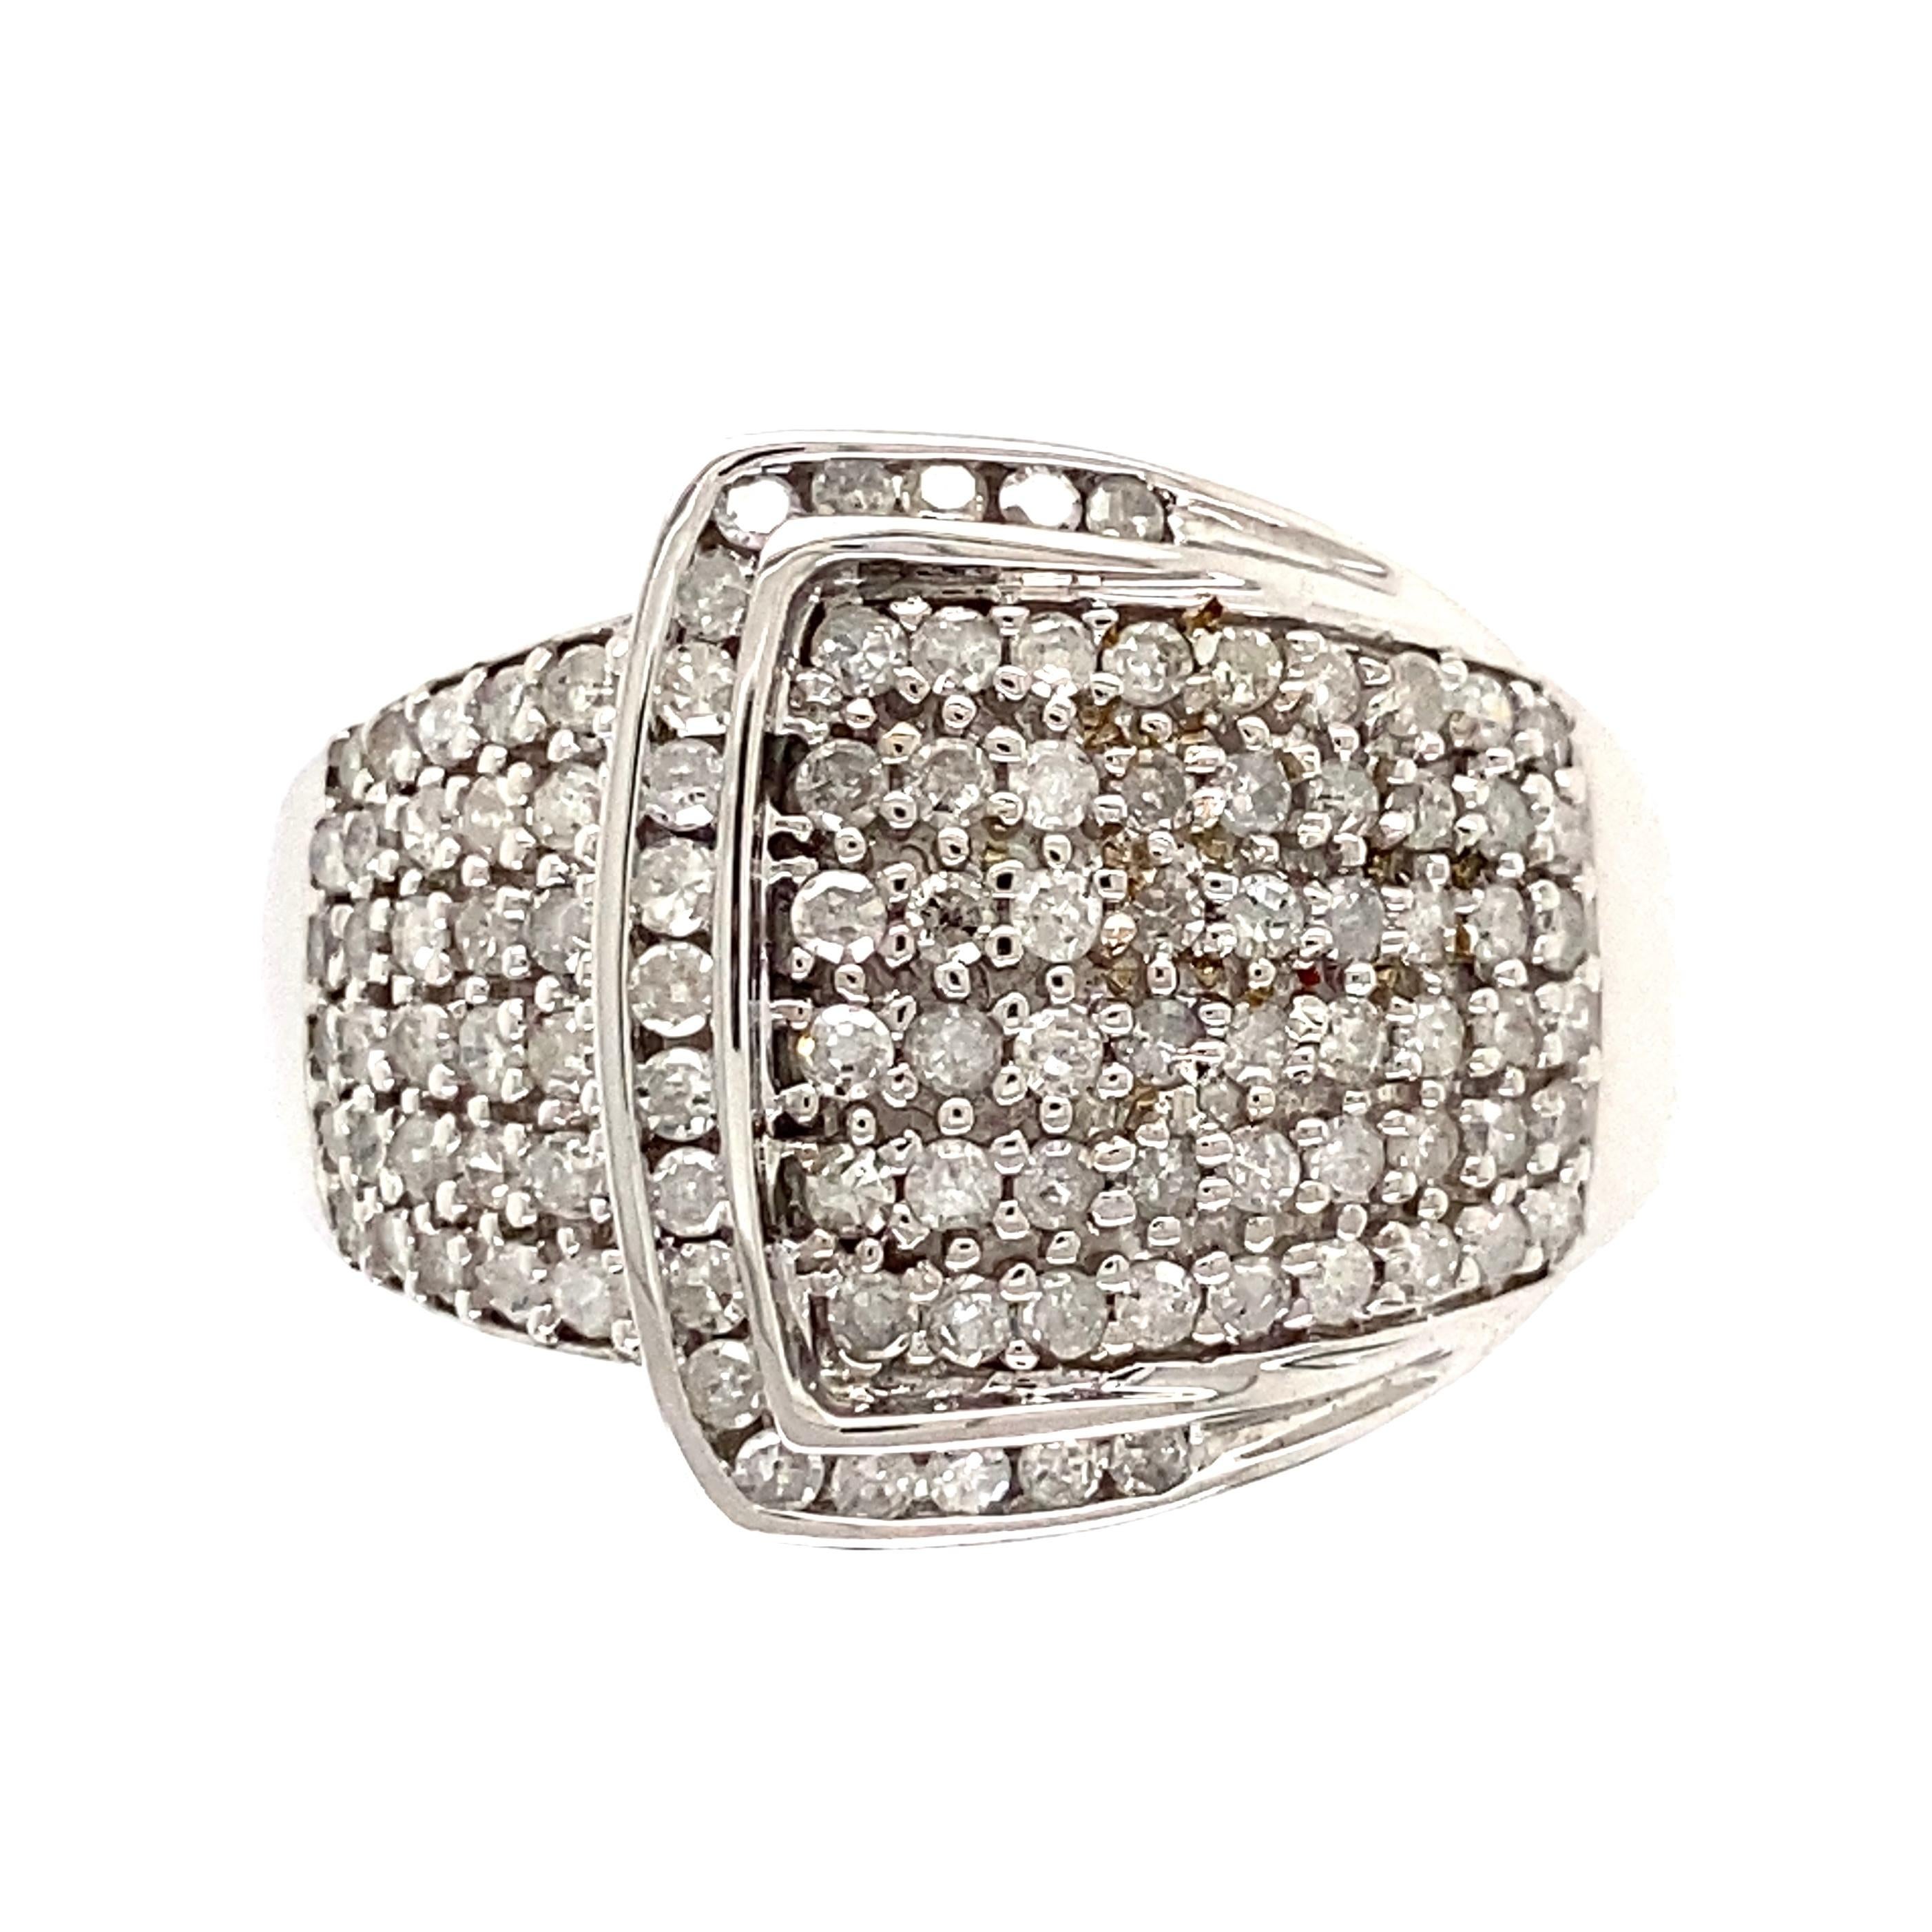 Awesome Diamond Buckle Gold Ring. Pave Hand set with Diamonds, weighing approx. 1.70tcw. Hand crafted 14K White Gold mounting. Ring size 10.25, we offer ring resizing. More Beautiful in real time...A piece you’ll turn to time and time again! 
